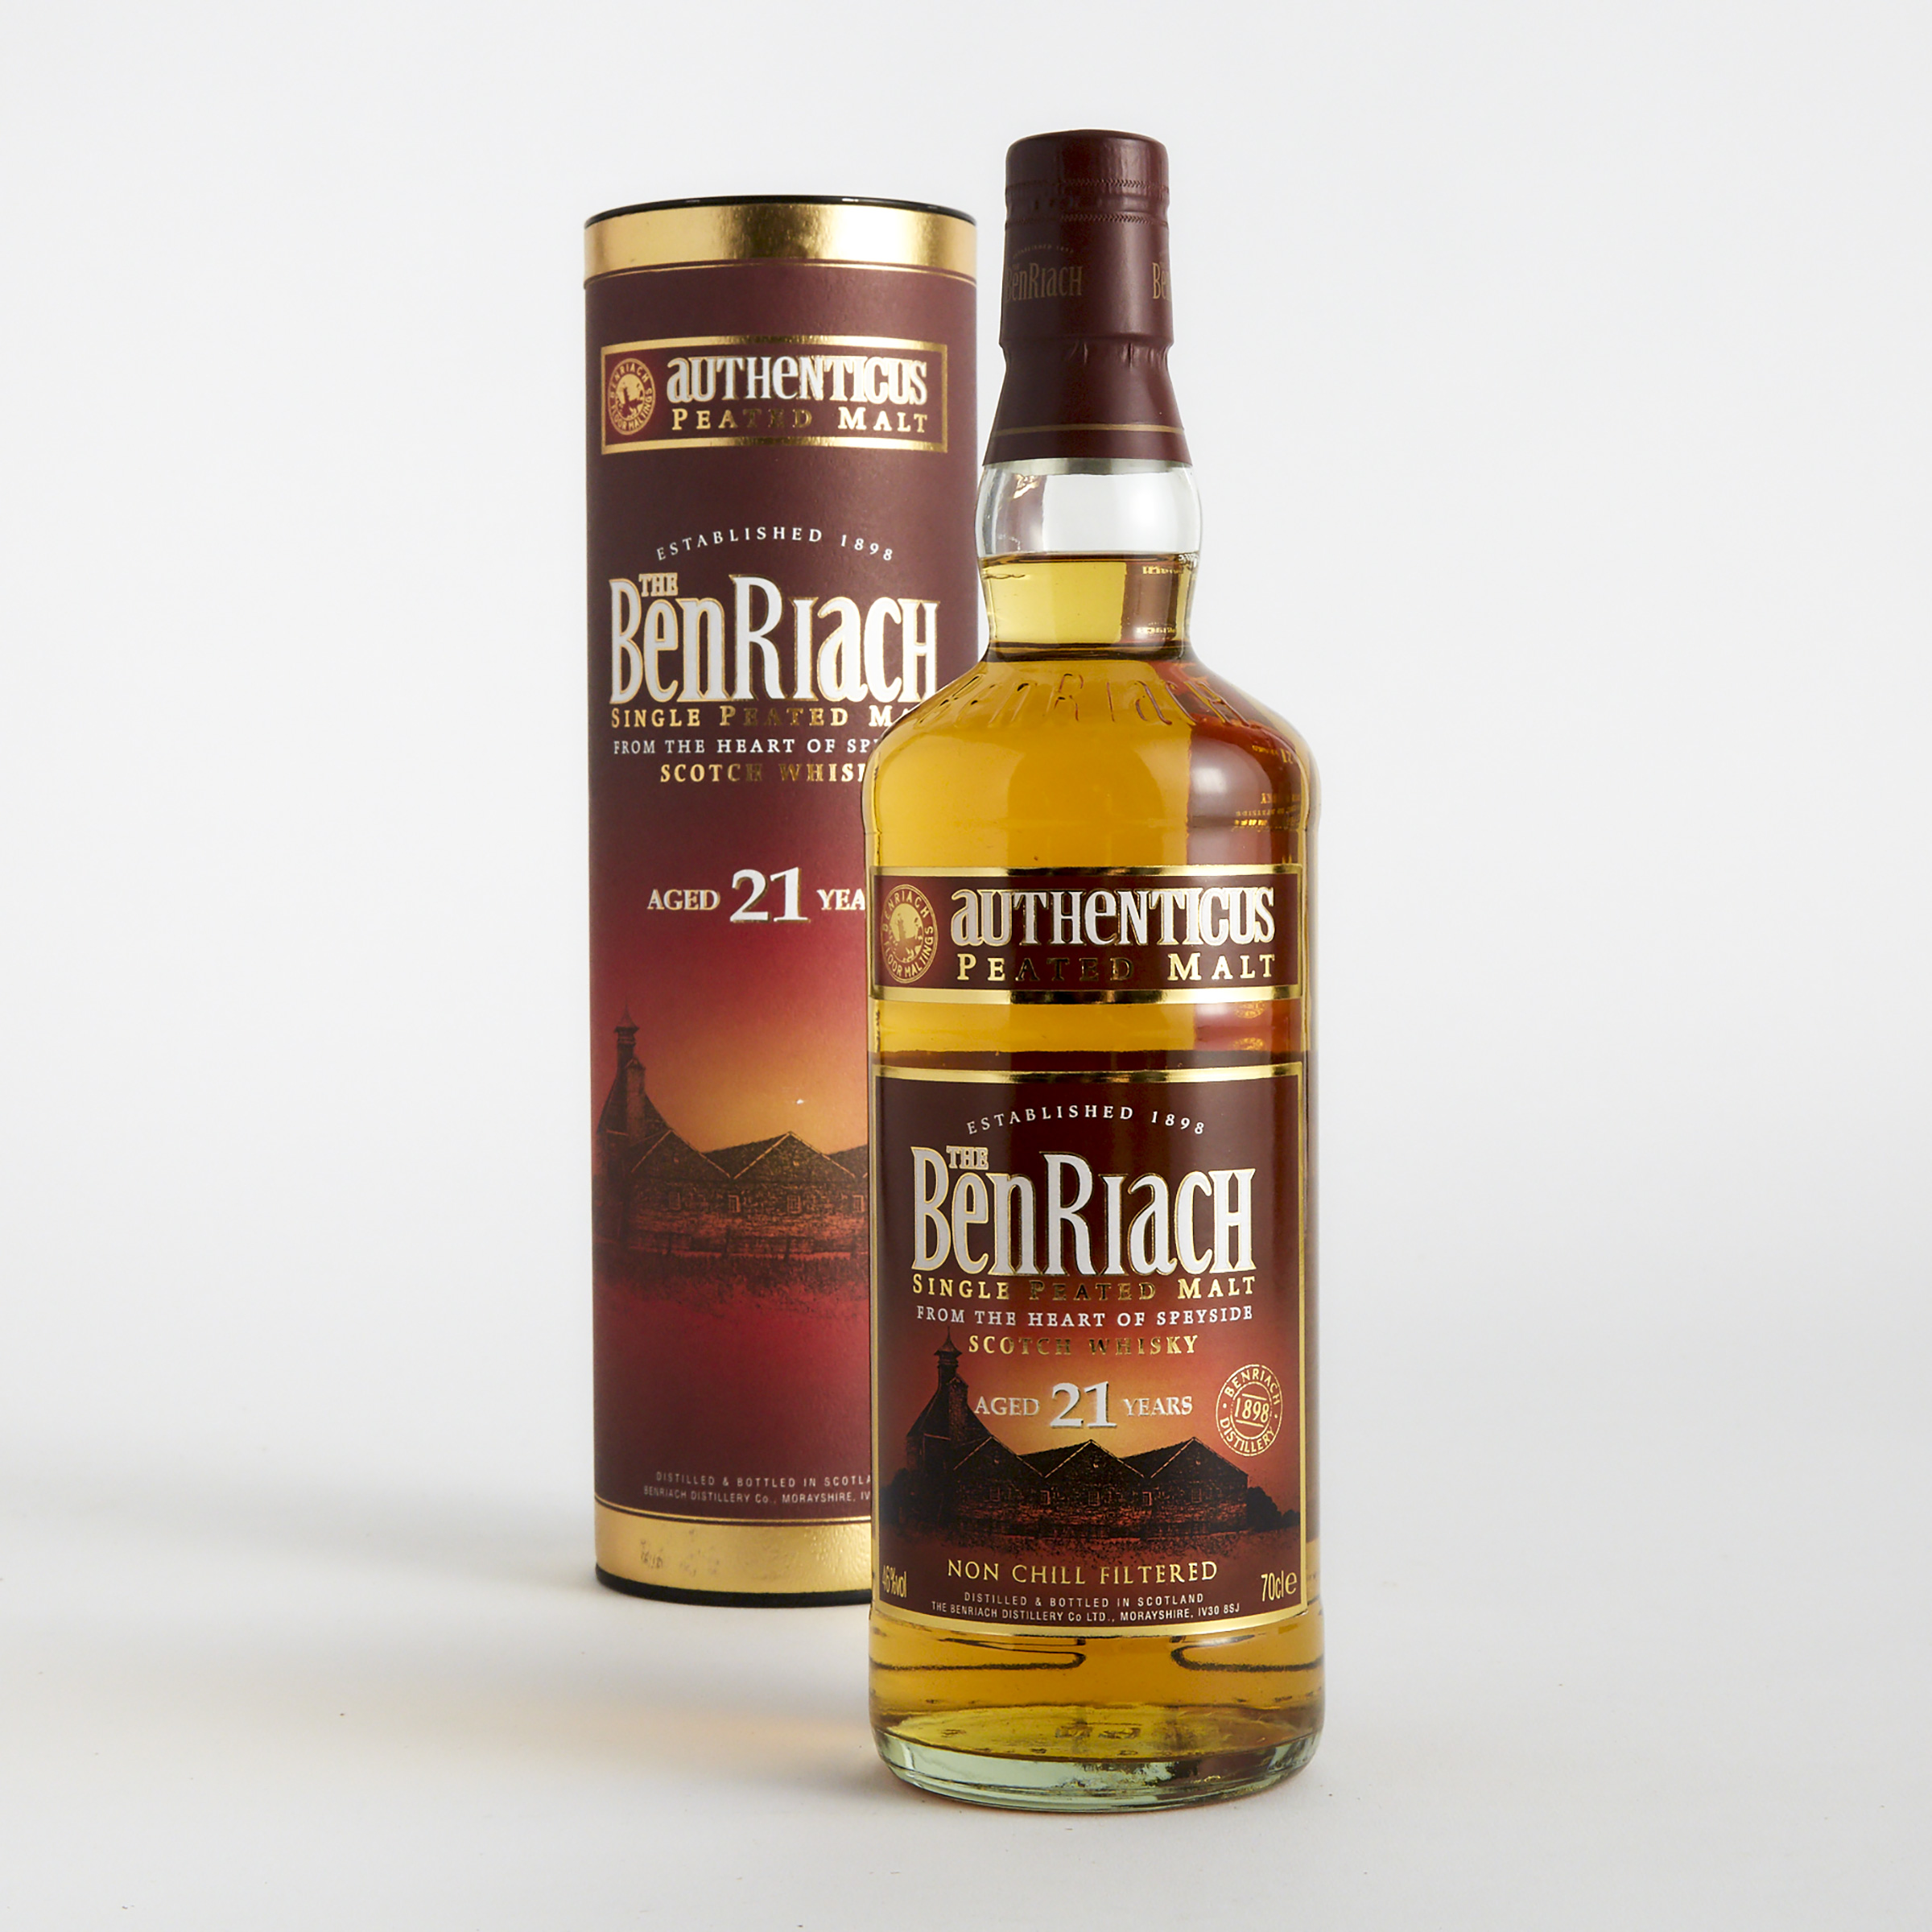 THE BENRIACH SINGLE MALT SCOTCH WHISKY 21 YEARS (ONE 70 CL)